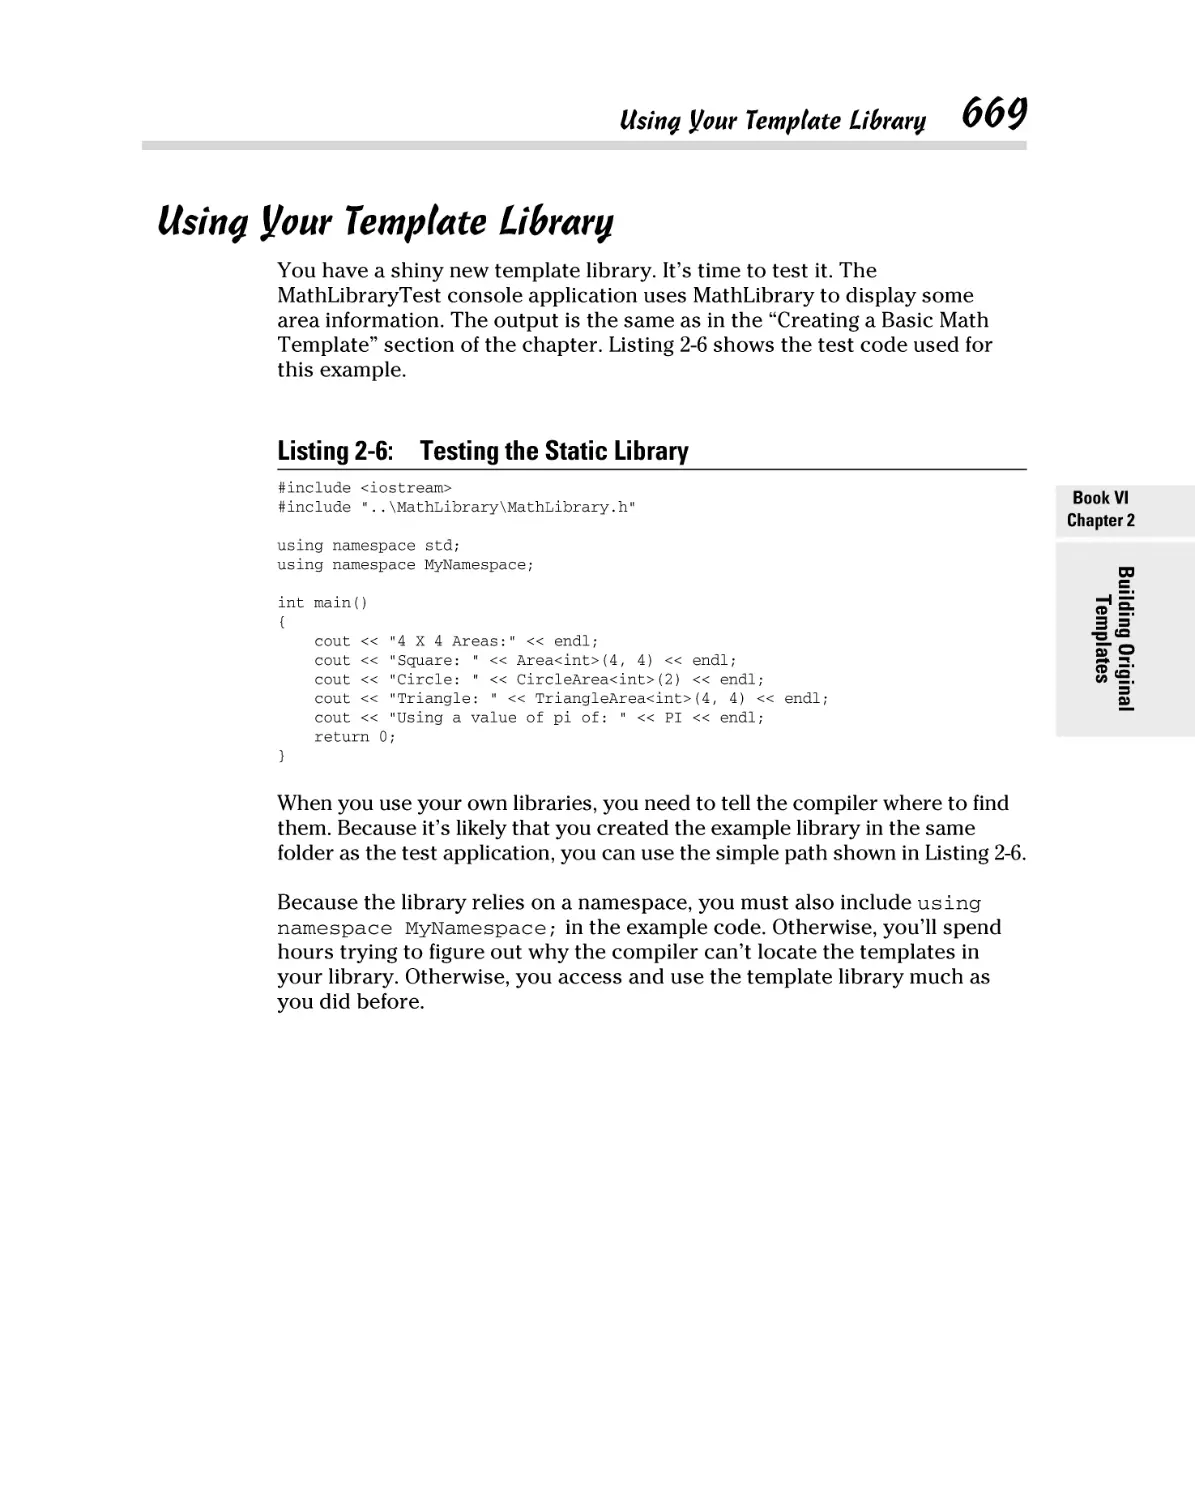 Using Your Template Library